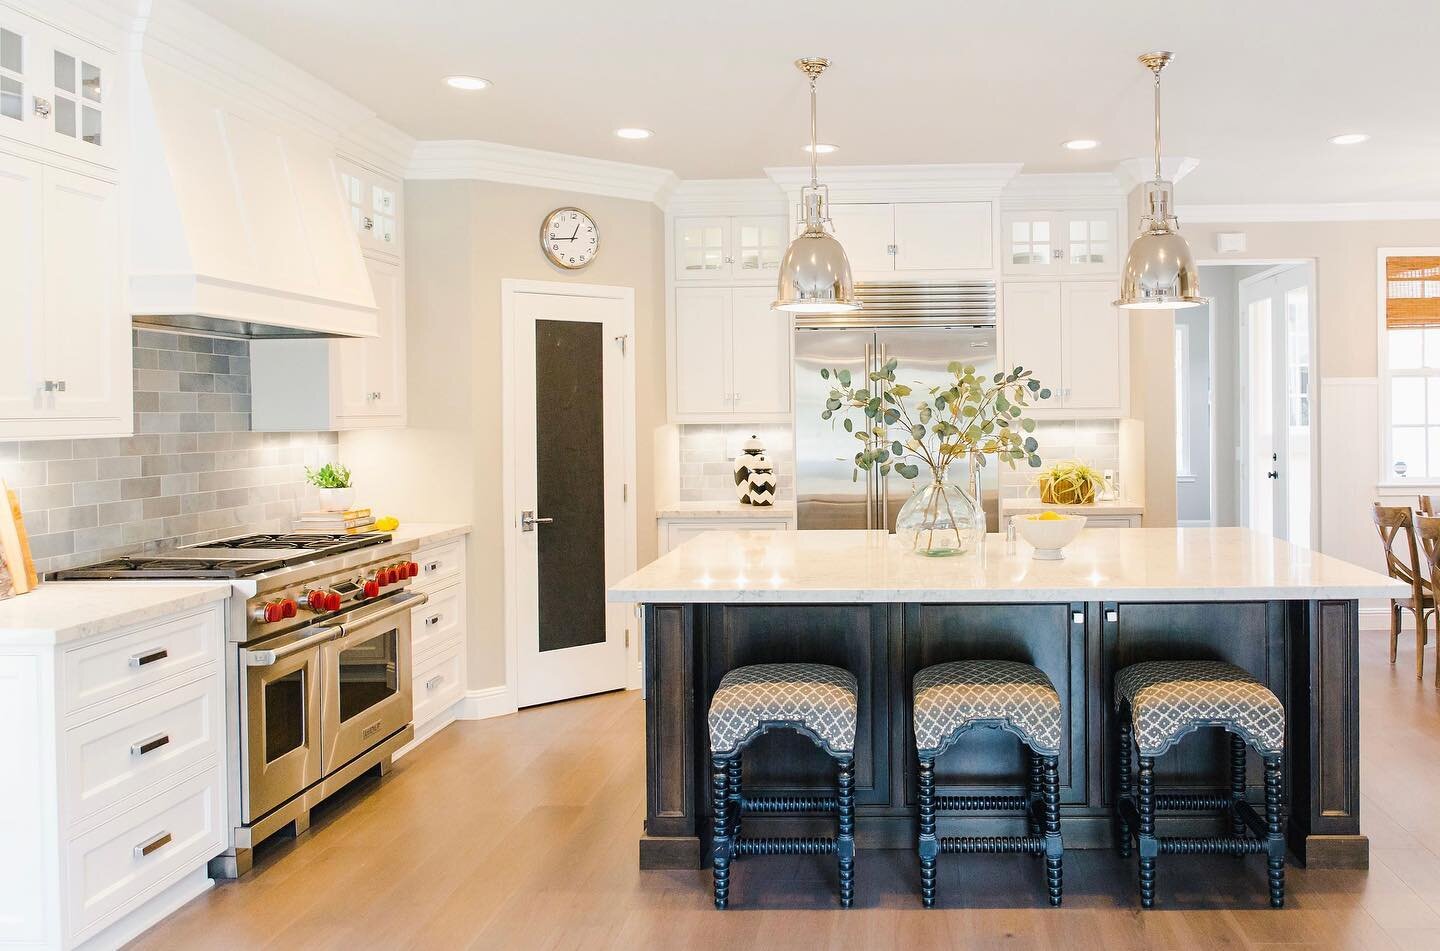 An oldie but goodie on this flashback Friday!
Updated a very 90&rsquo;s situation while still keeping some traditional elements to remain cohesive with the rest of the home. Our favorite part is the @walkerzanger backsplash, which is a marble tile ca